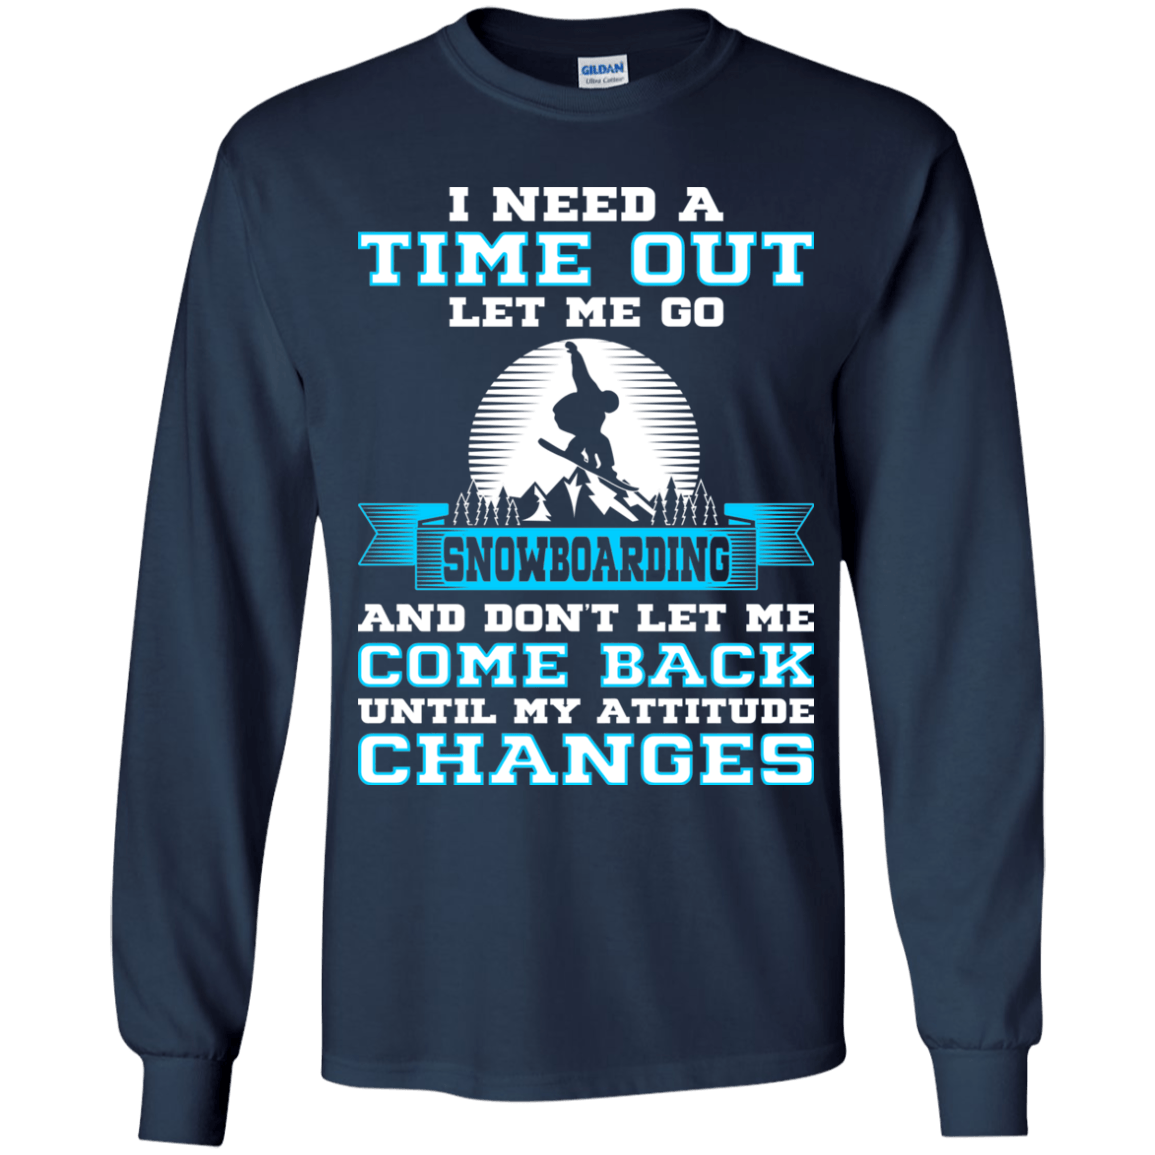 I Need A Time Out To Go Snowboarding Youth Shirt and Hoodies - Powderaddicts